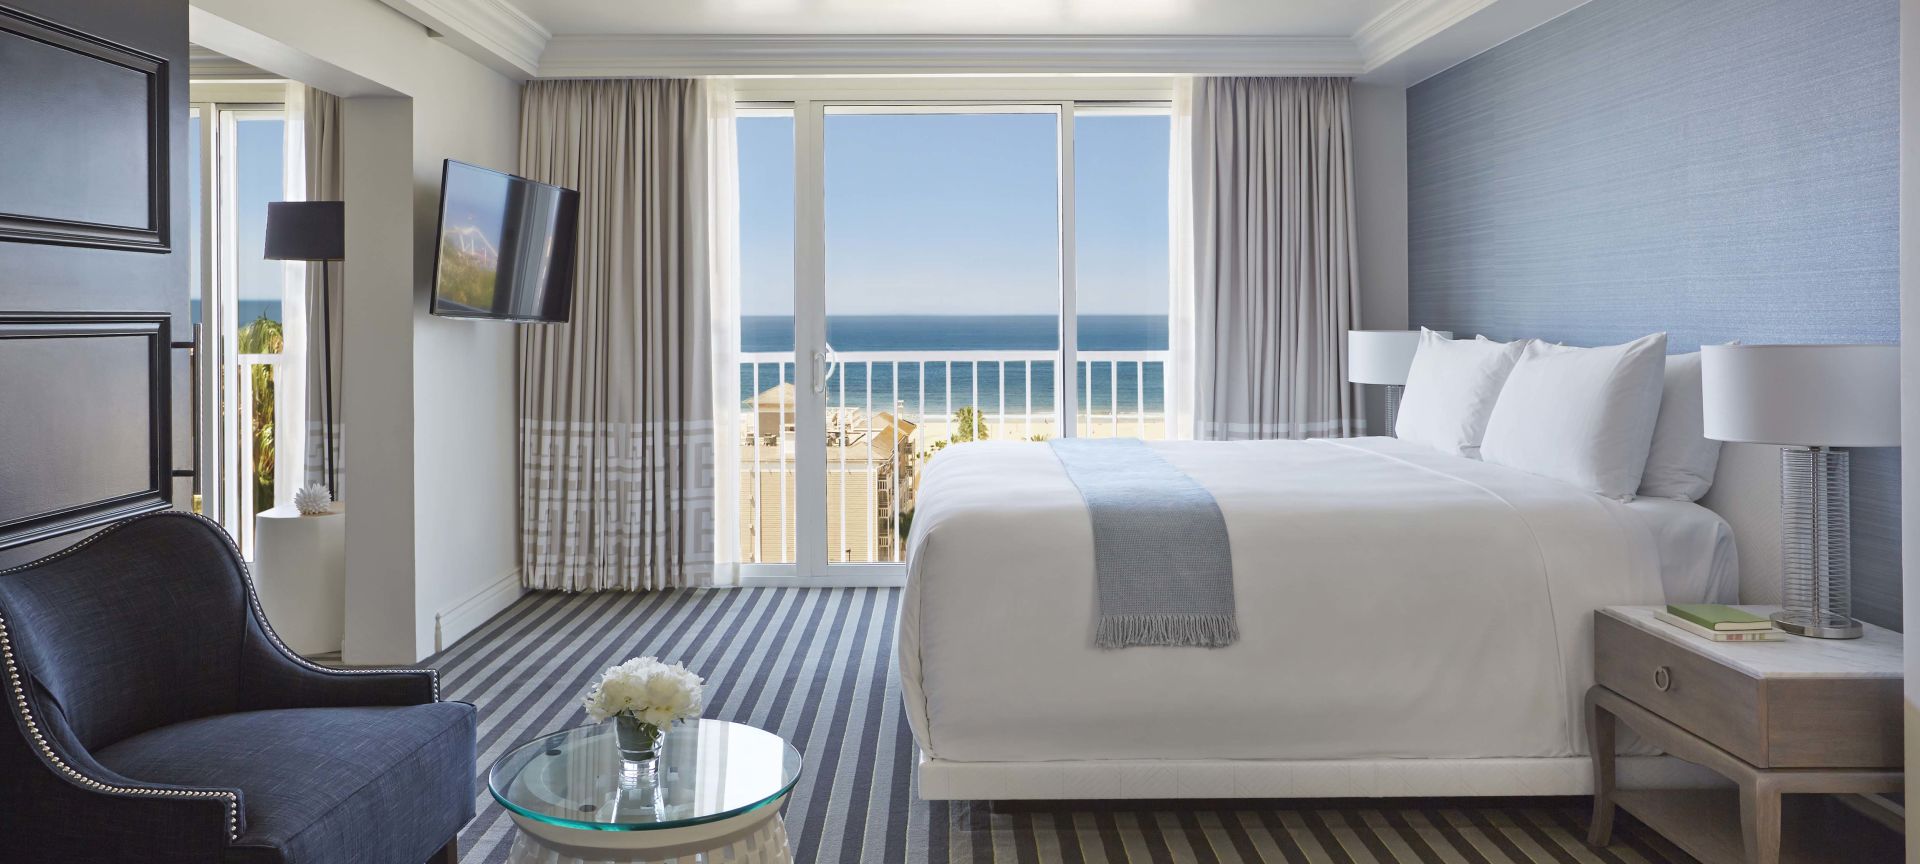 Viceroy Santa Monica guestroom with a view of the ocean 